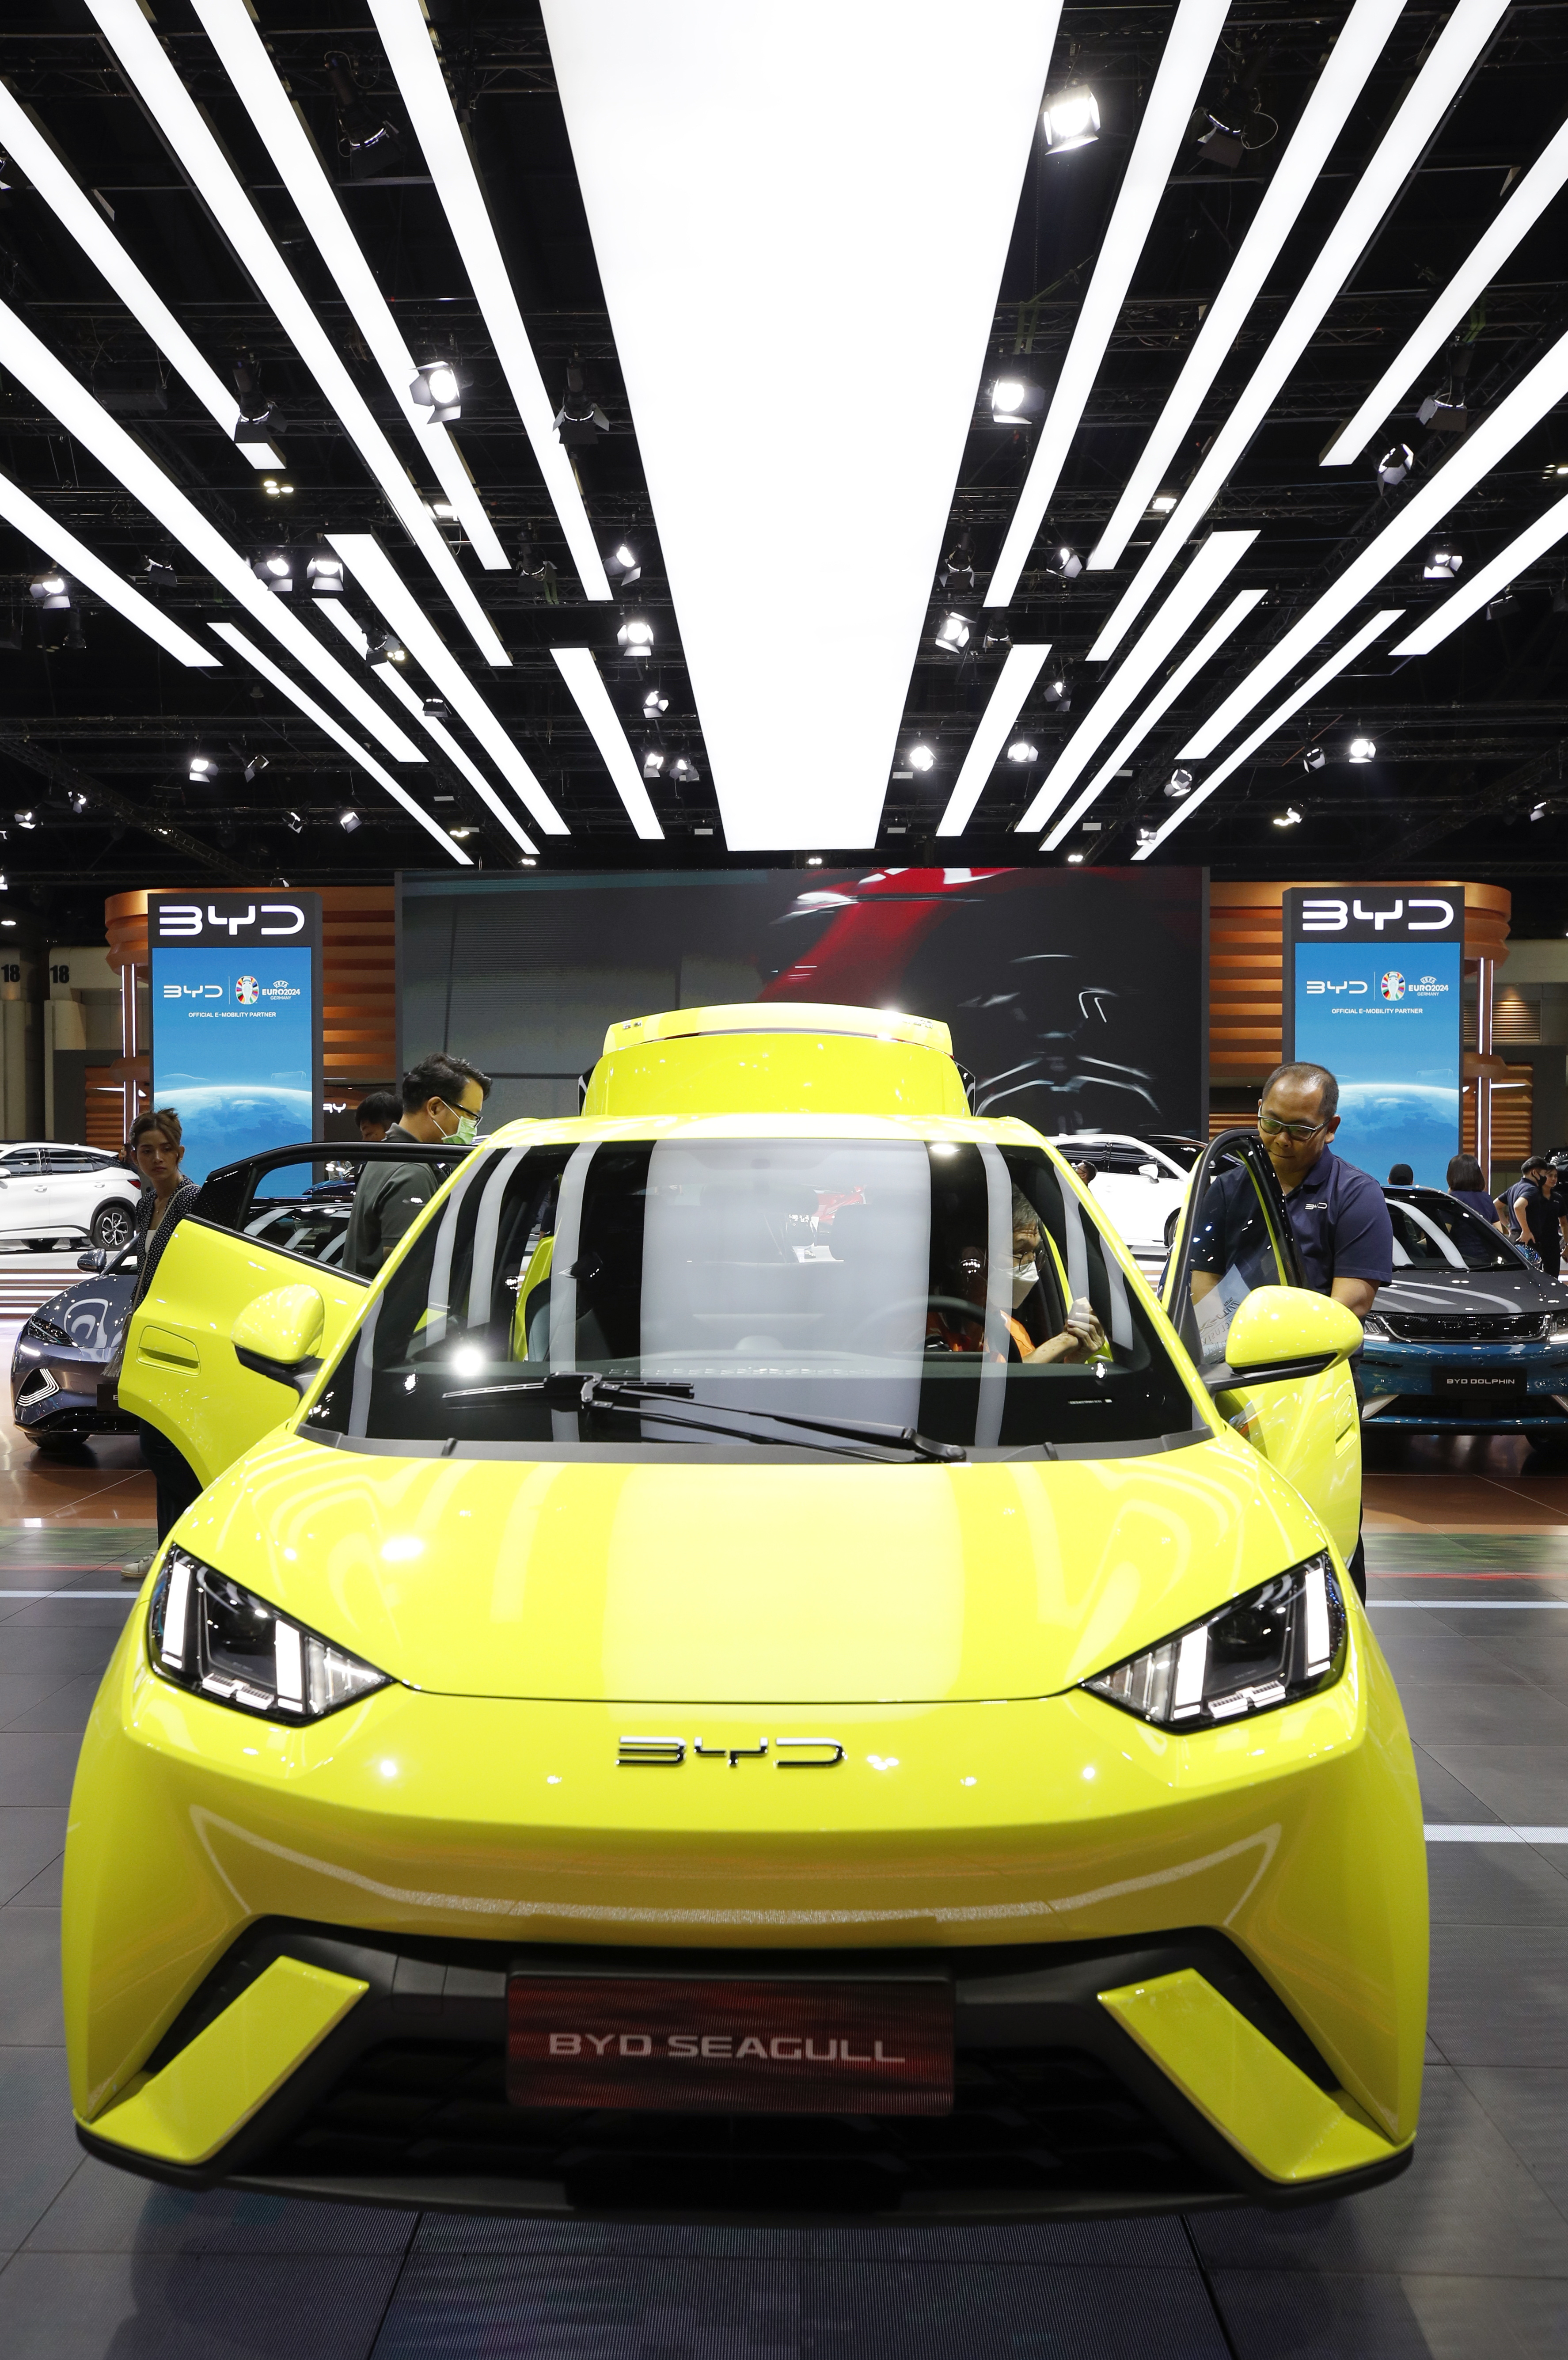 BYD will bring the next generation of its big-value BYD Seagull supermini to Europe and the UK